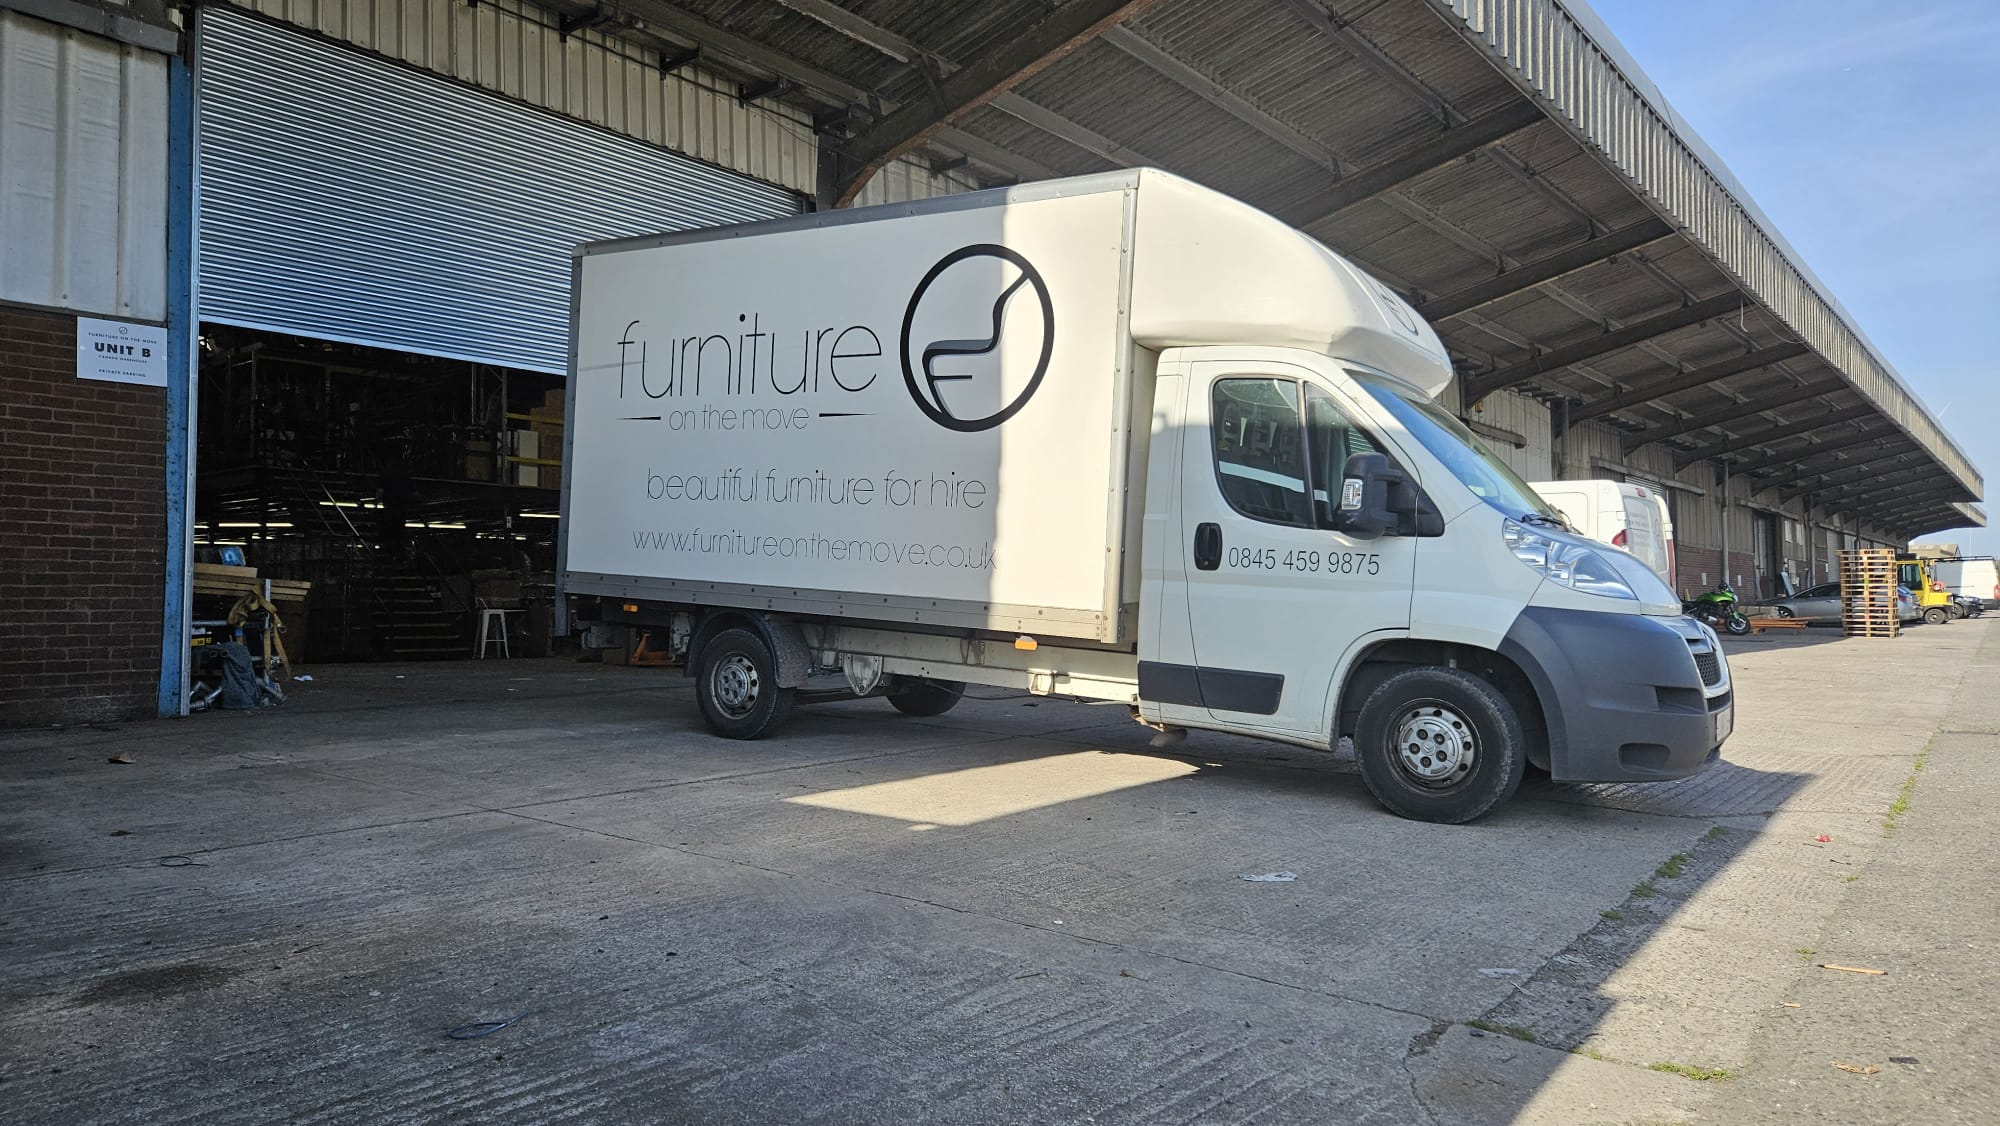 Furniture On The Move Van Delivering Furniture Hire To Events